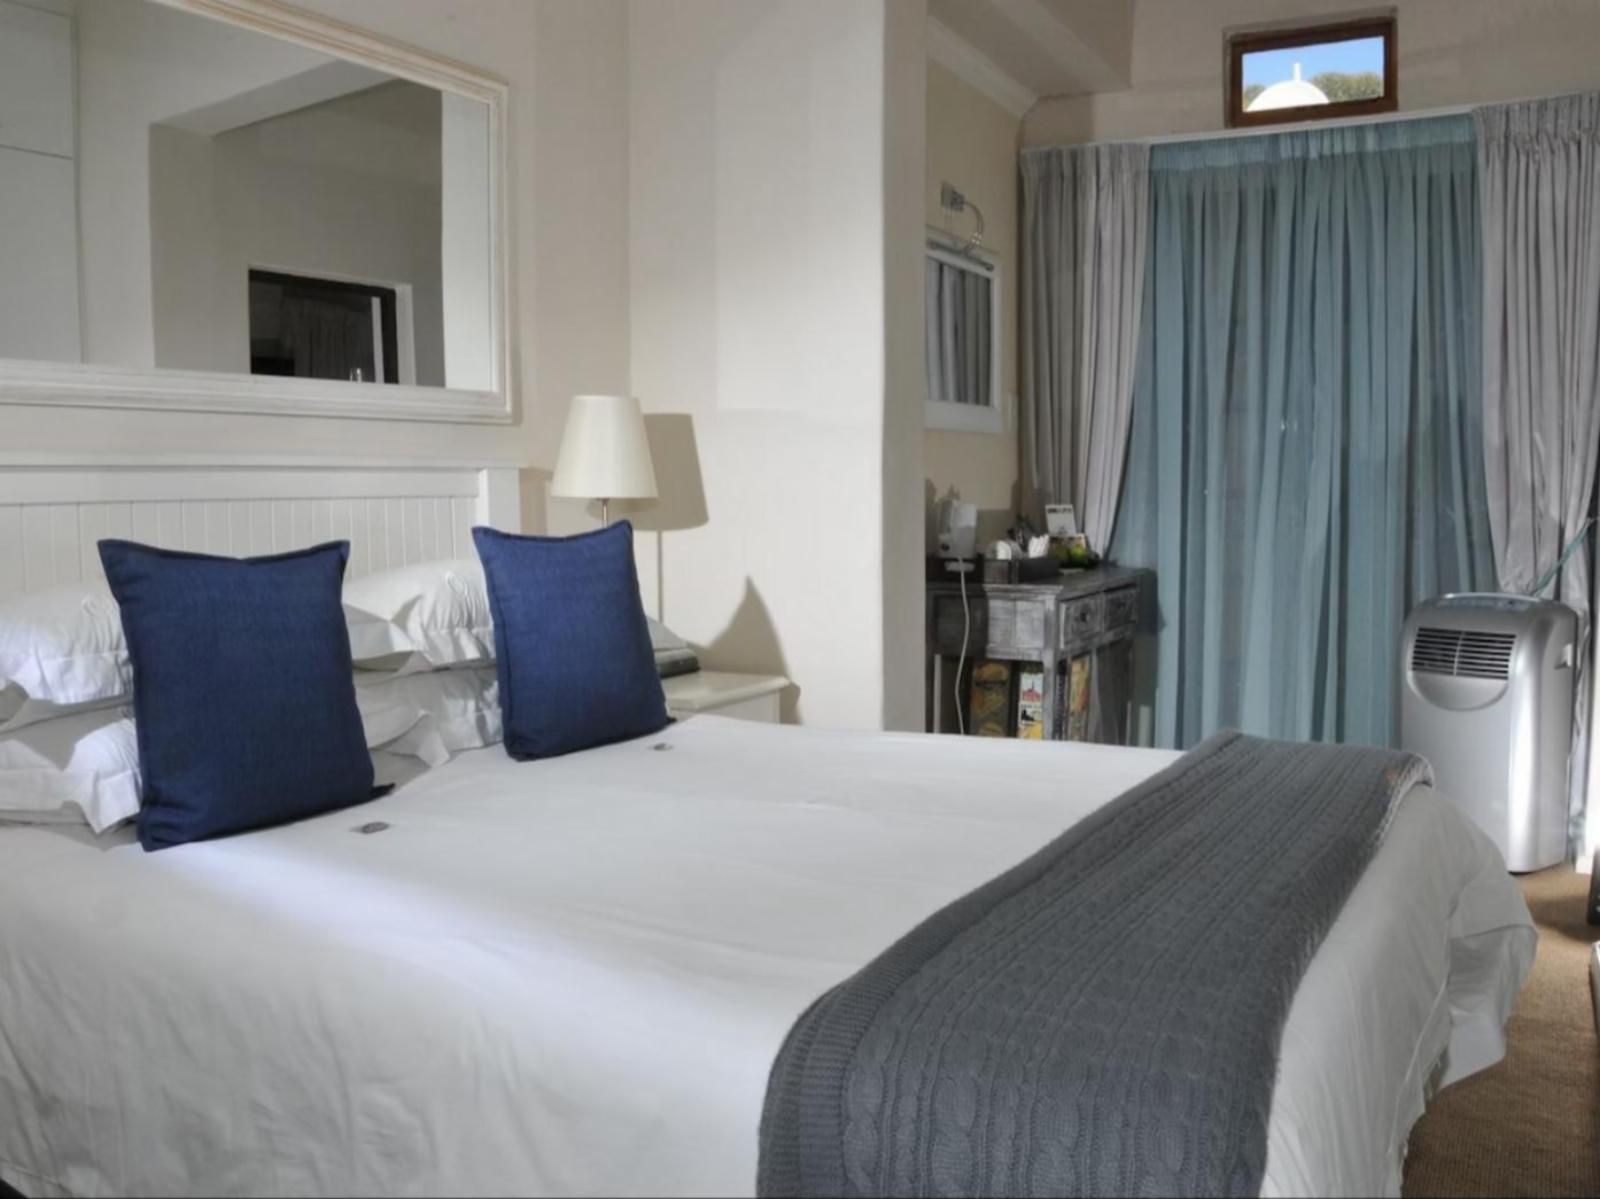 Olaf S Guesthouse Sea Point Cape Town Western Cape South Africa Unsaturated, Bedroom